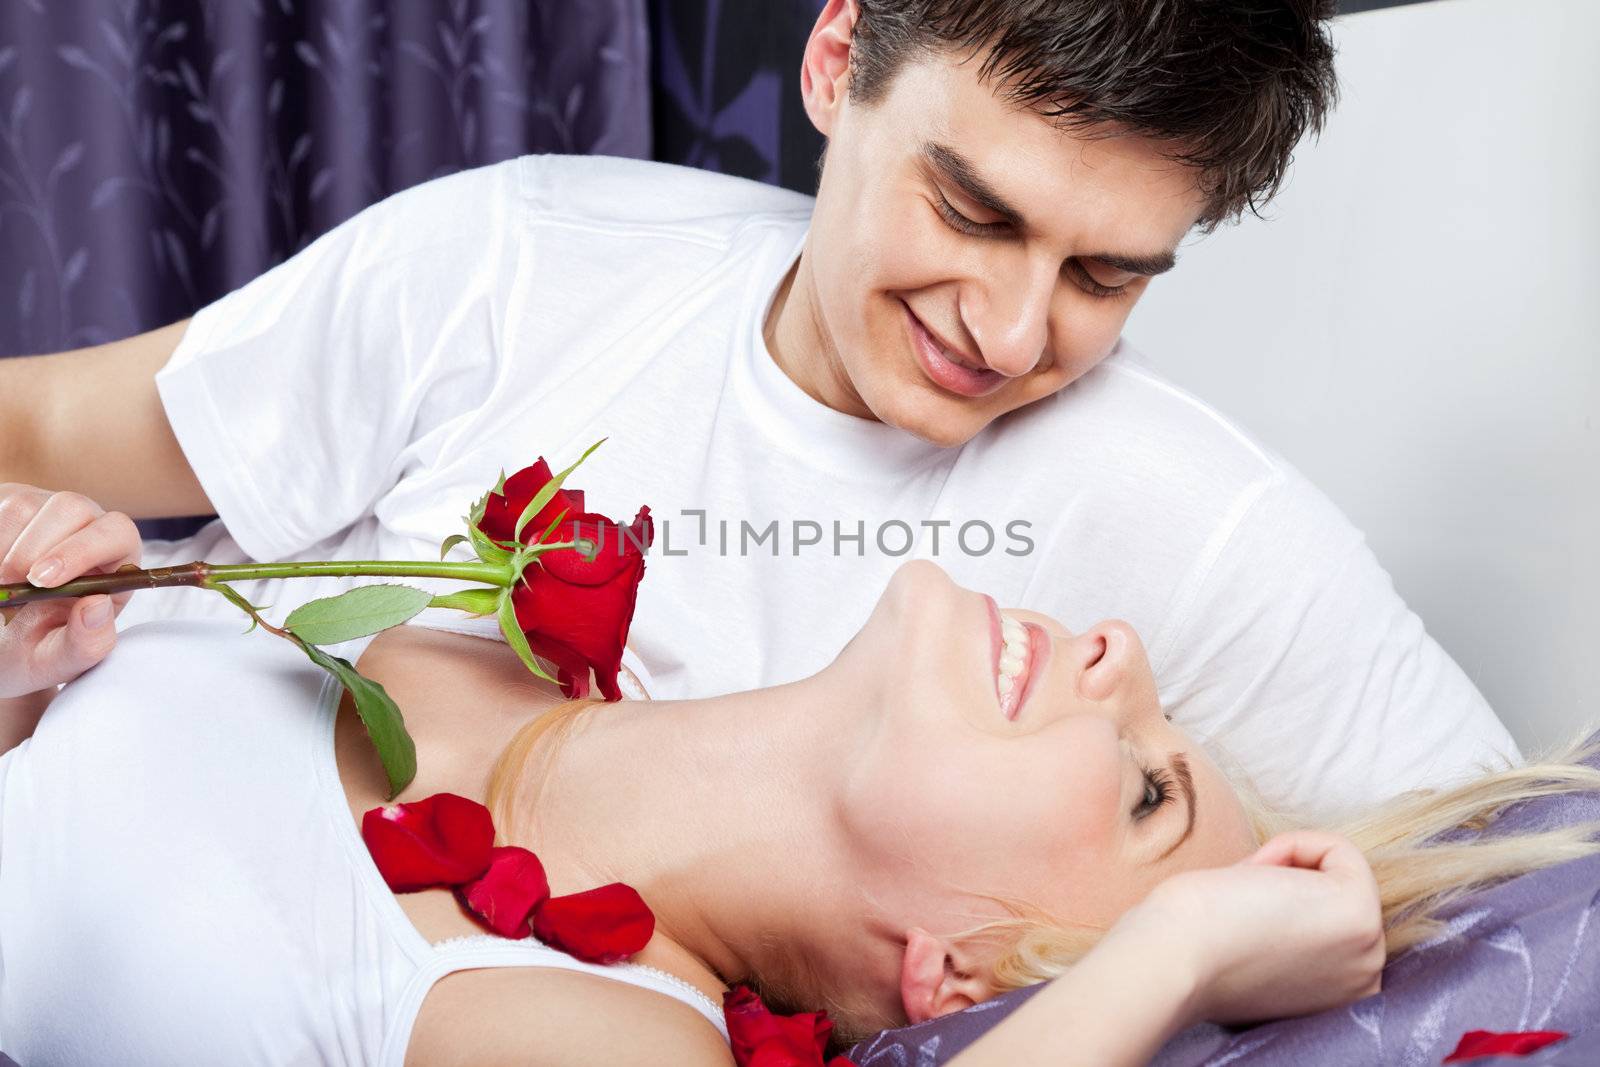 Happy young couple in bed, woman holding a red rose and smiling